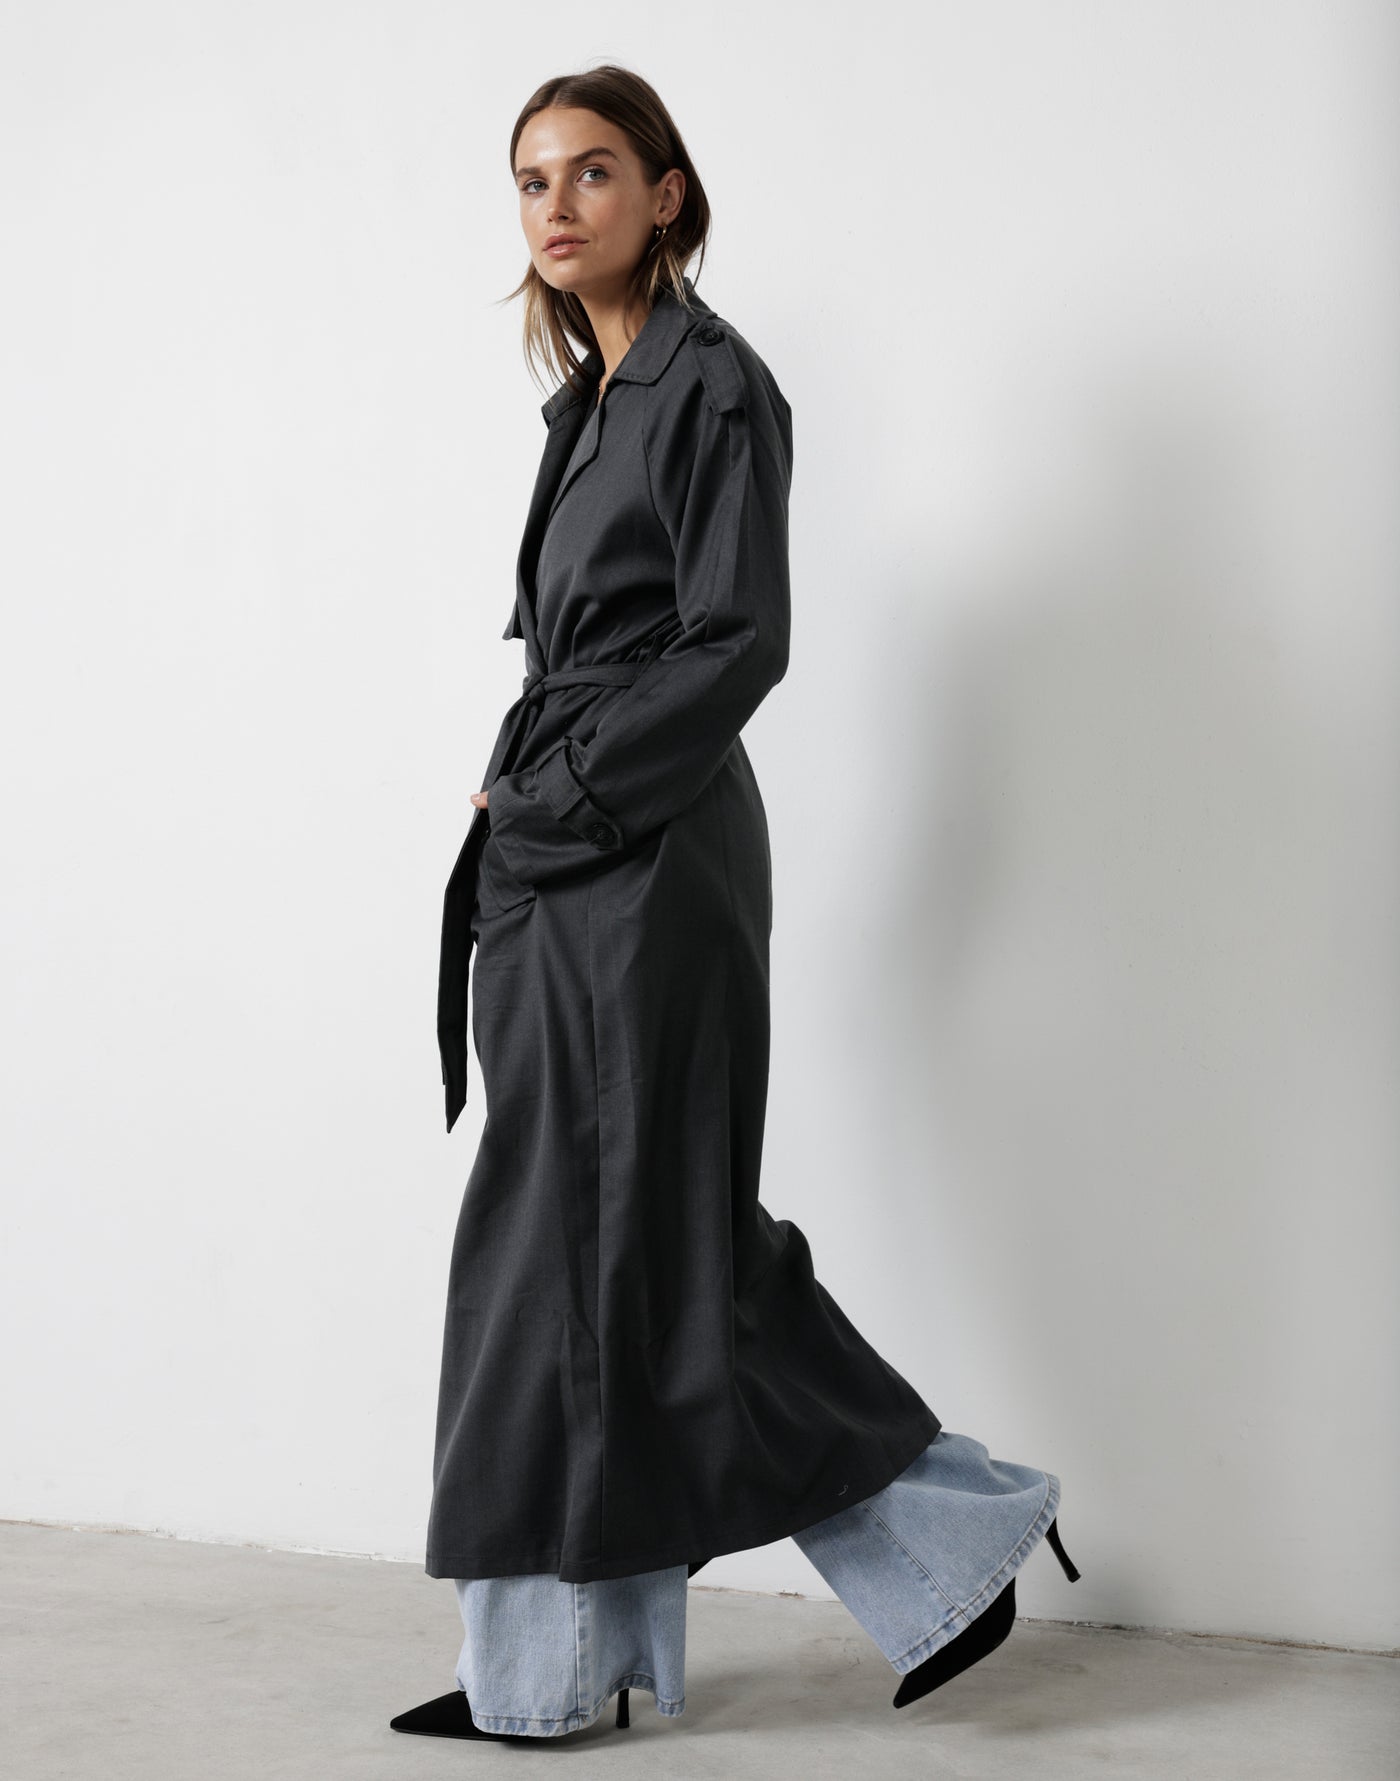 Jericho Trench Coat (Charcoal) - Charcoal Grey Trench Coat - Women's Outerwear - Charcoal Clothing